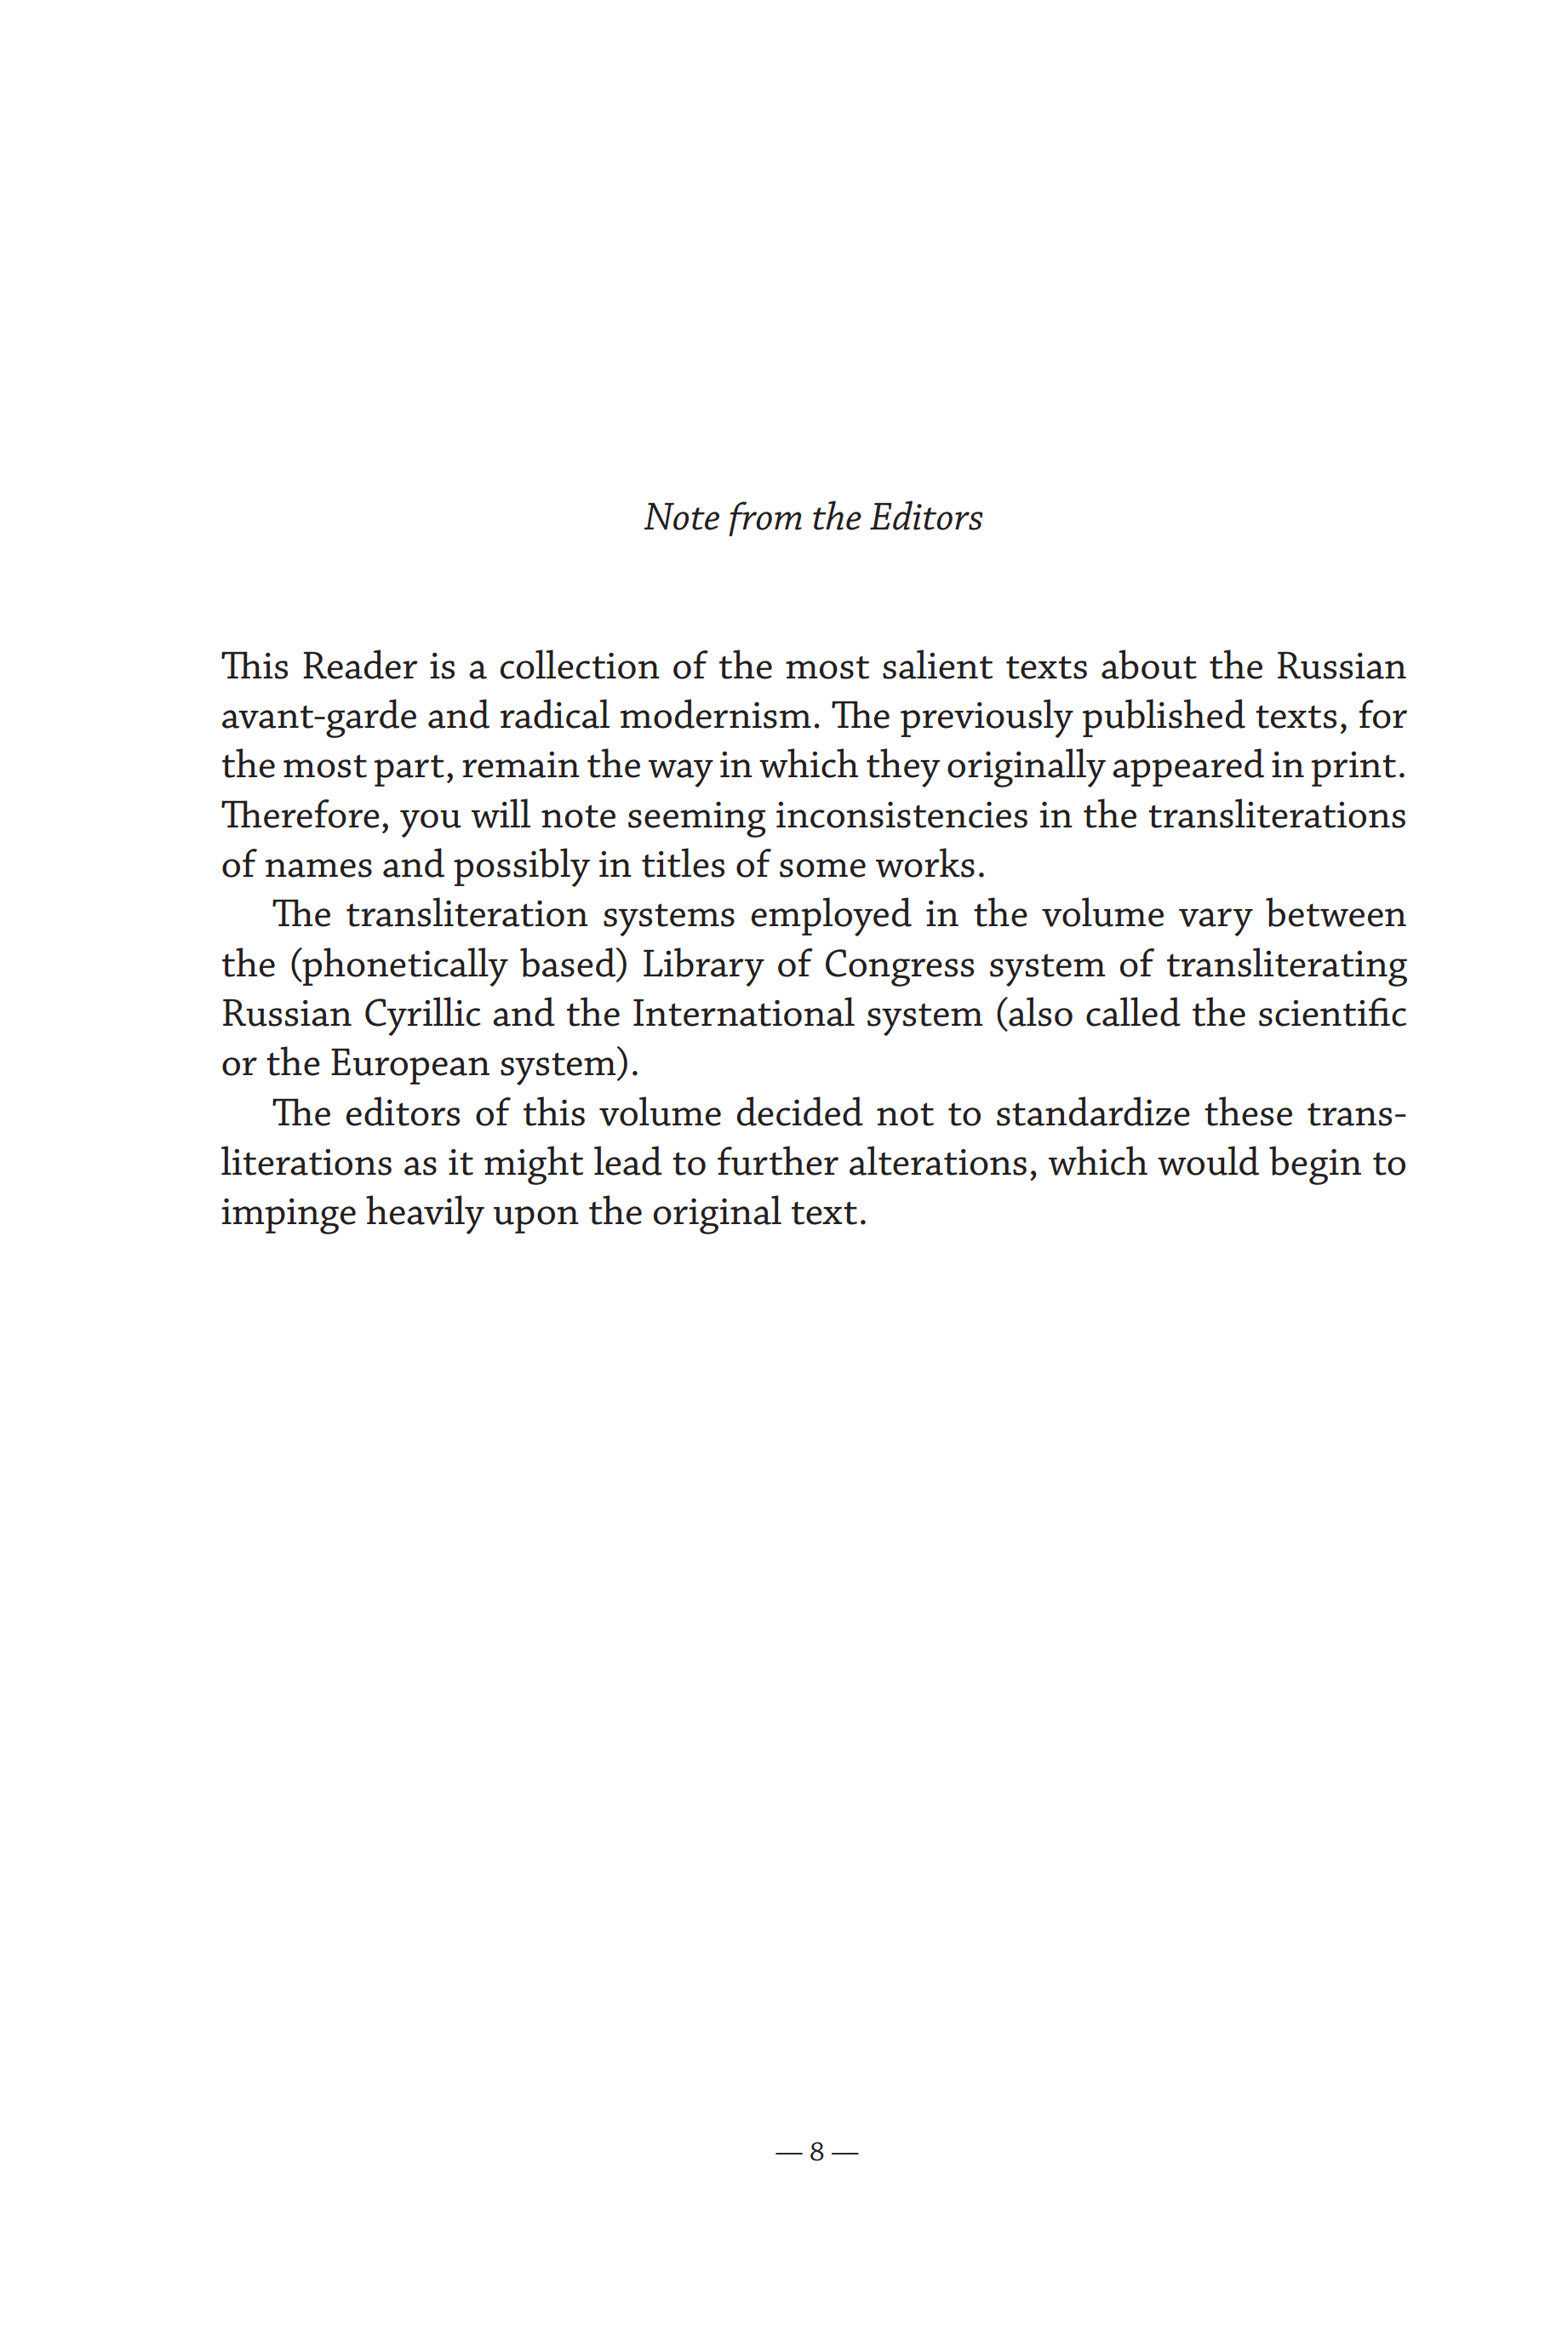 The Russian Avant-Garde and Radical Modernism : An Introductory Reader / Edited by Dennis G. Ioffe and Frederick H. White. — Boston : Academic Studies Press, 2012